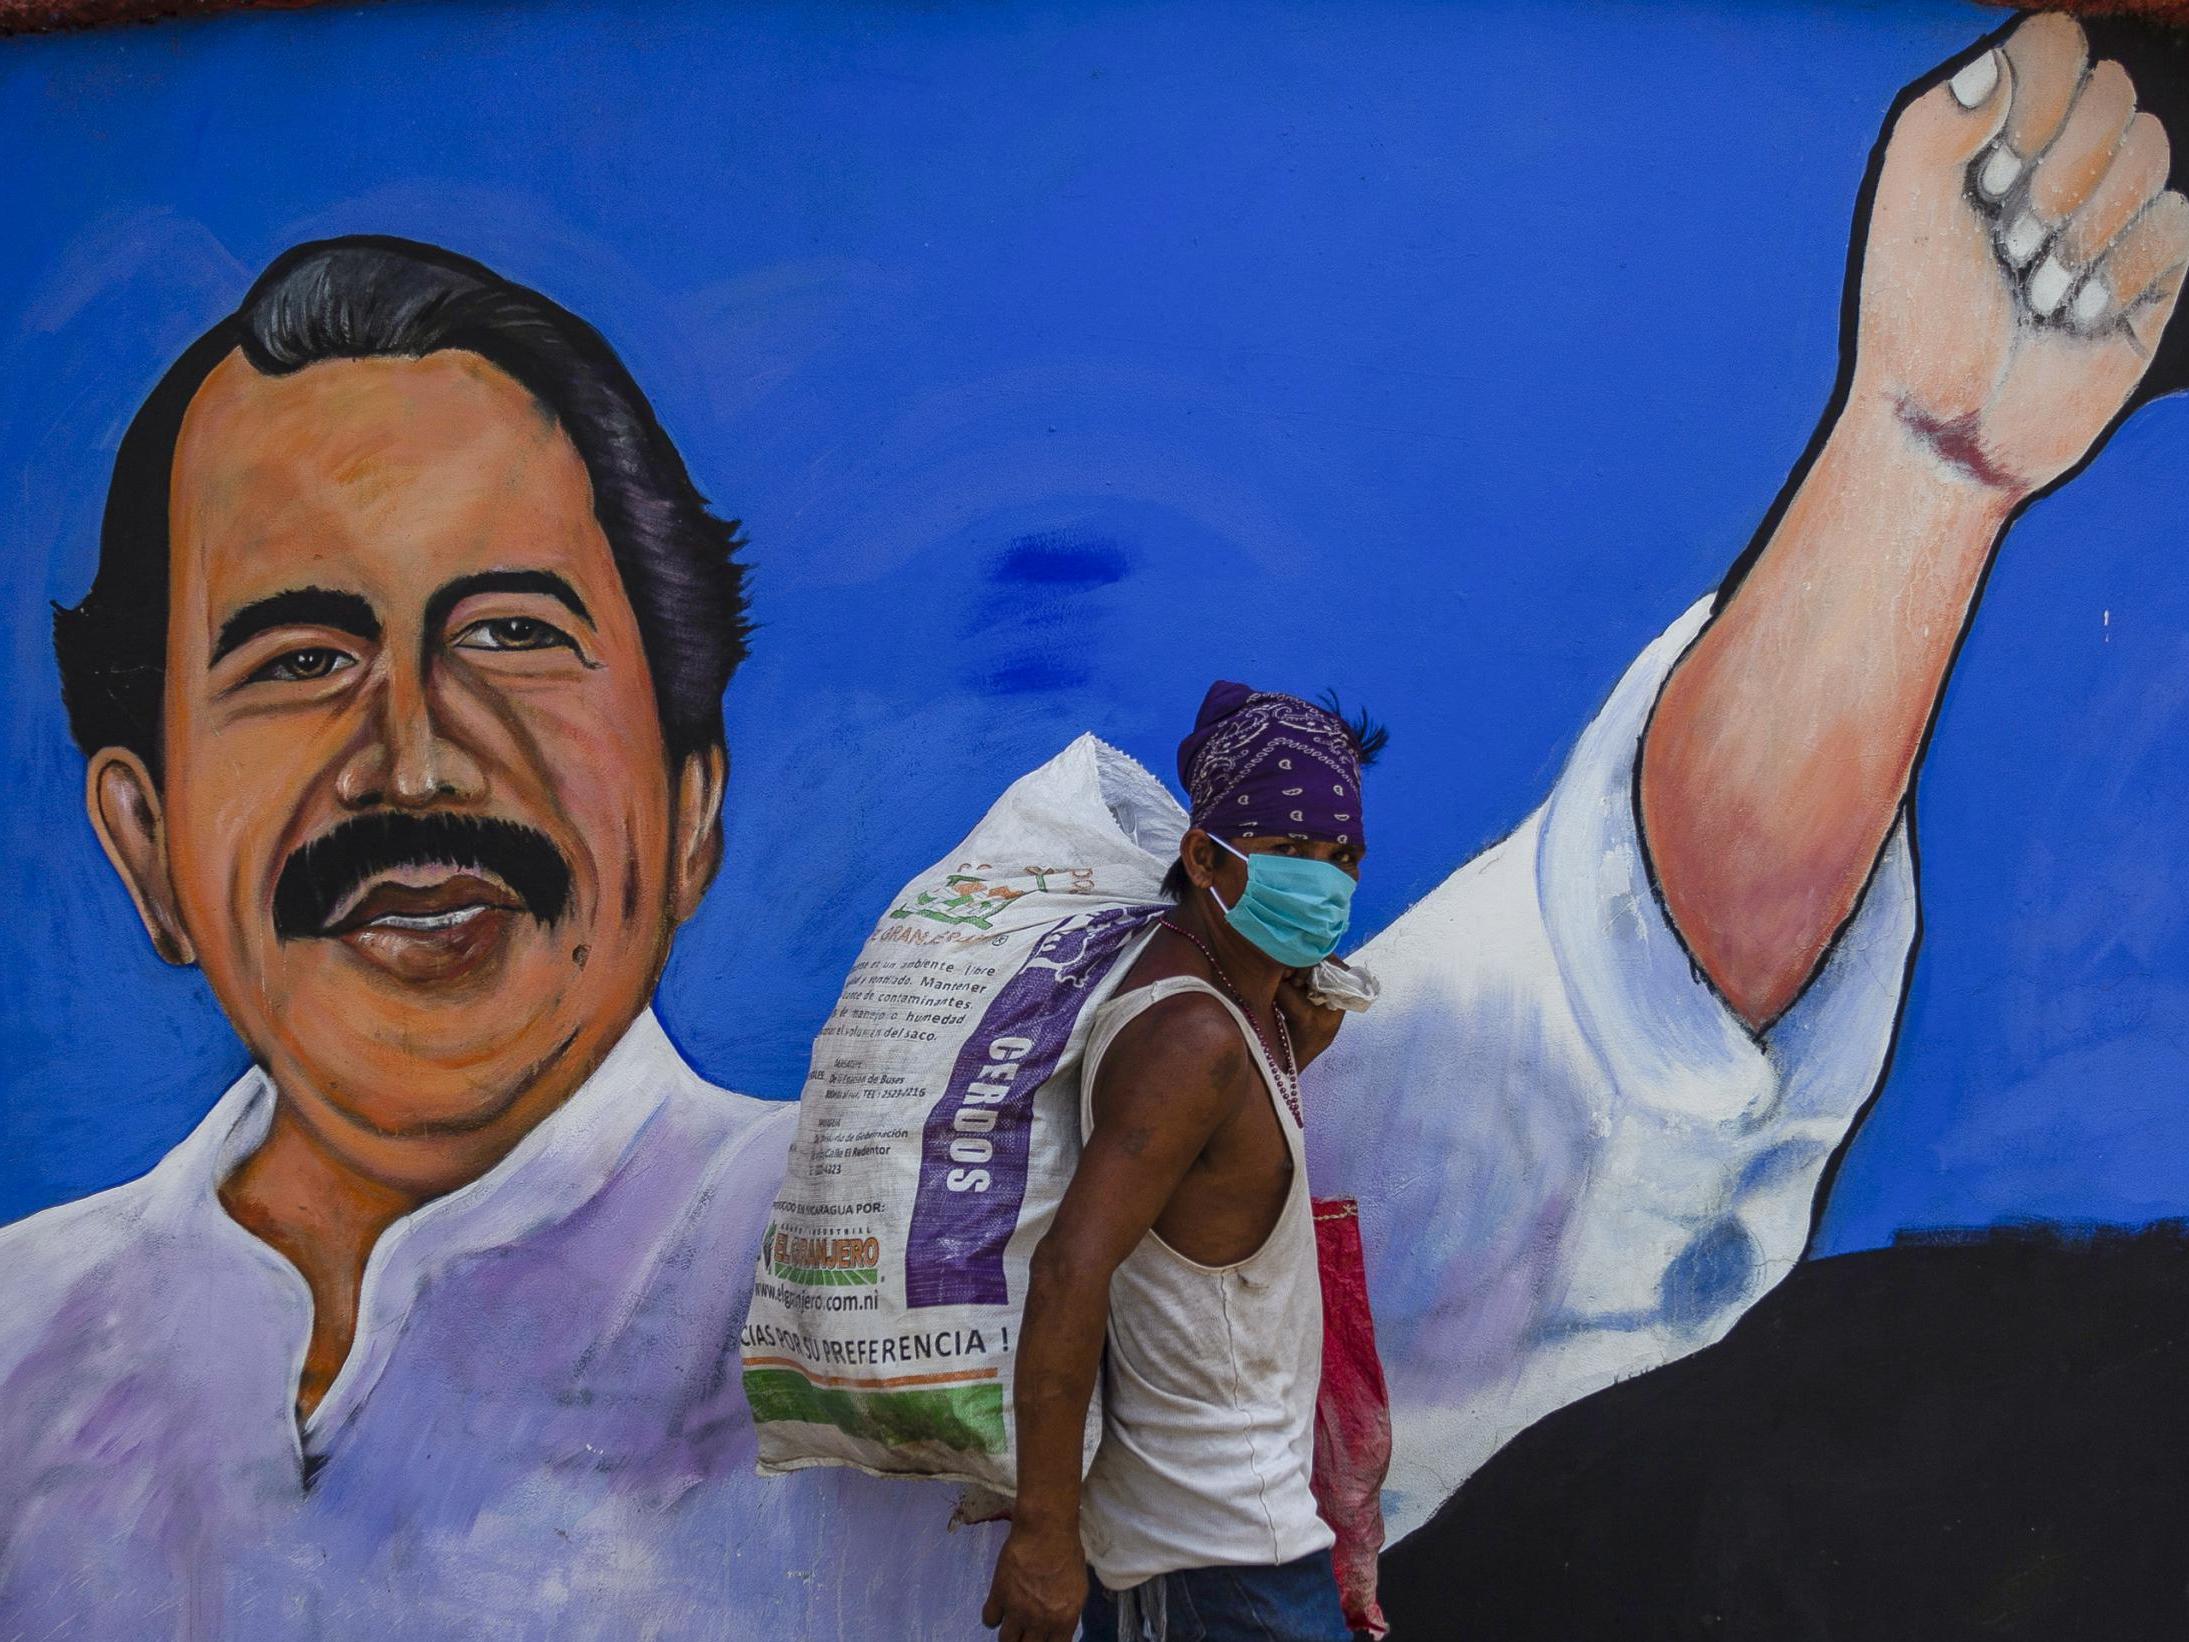 Daniel Ortega has not appeared publicly for 40 days